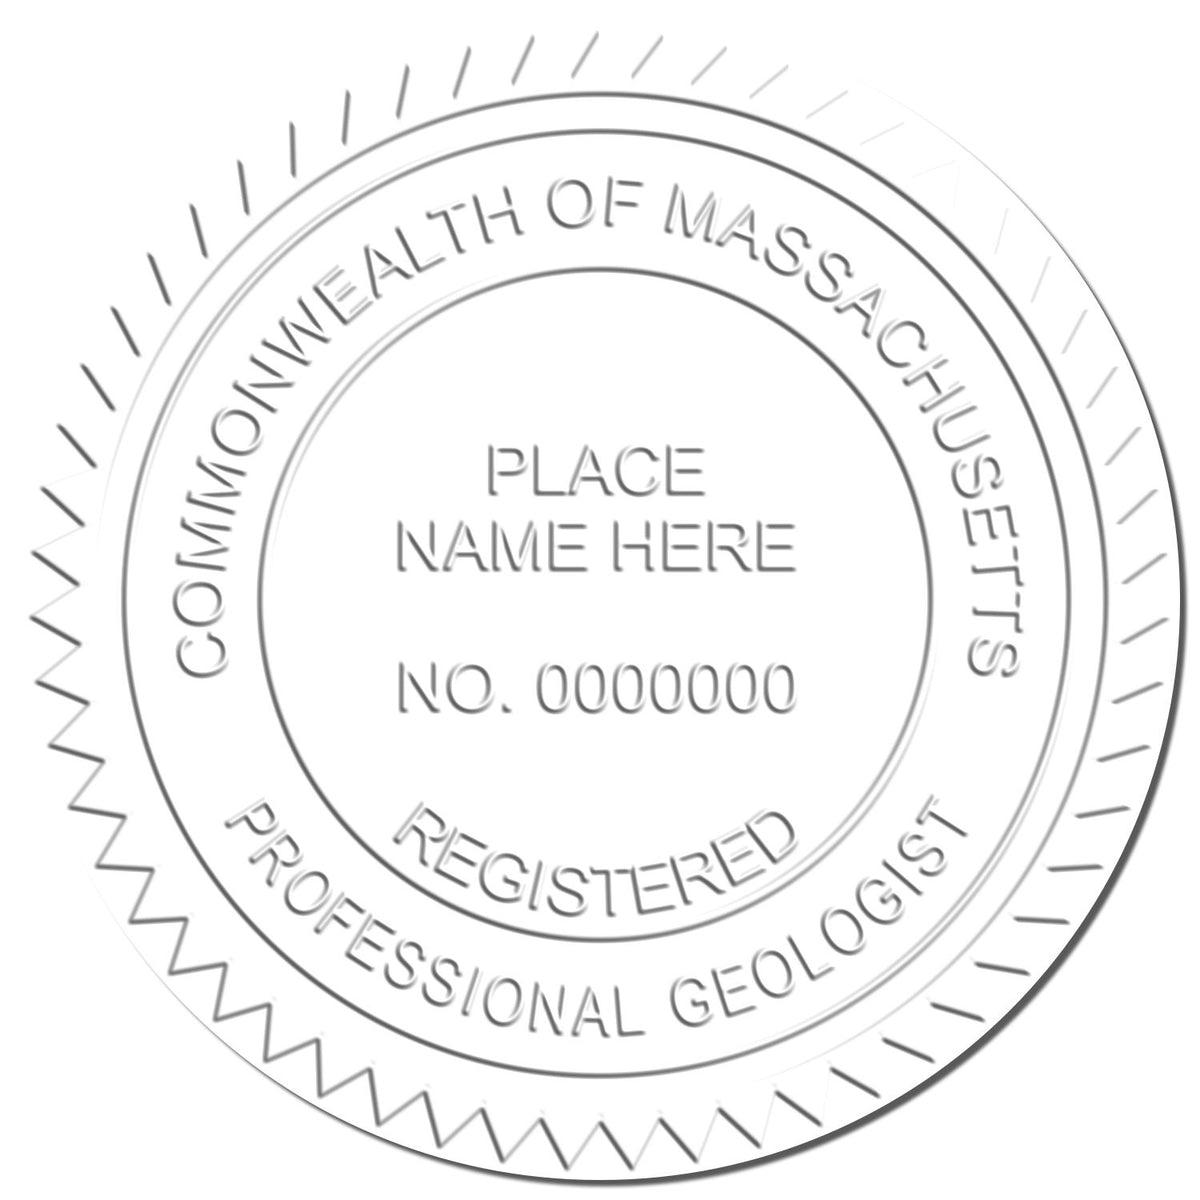 A stamped imprint of the Soft Massachusetts Professional Geologist Seal in this stylish lifestyle photo, setting the tone for a unique and personalized product.